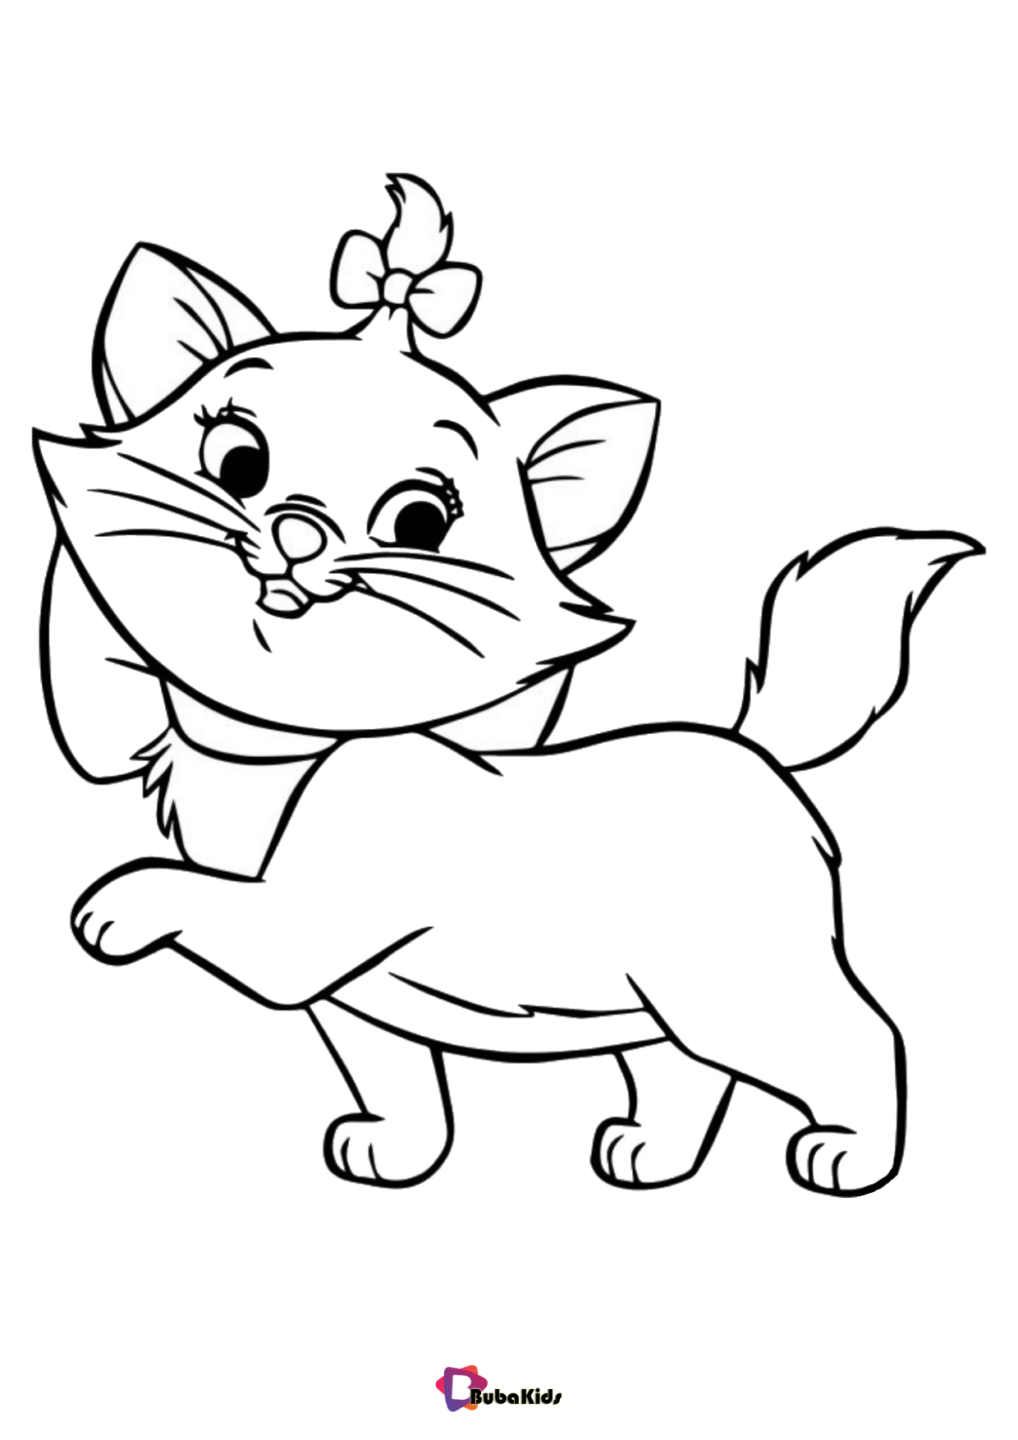 cut-lovely-cat-coloring-page-bubakids